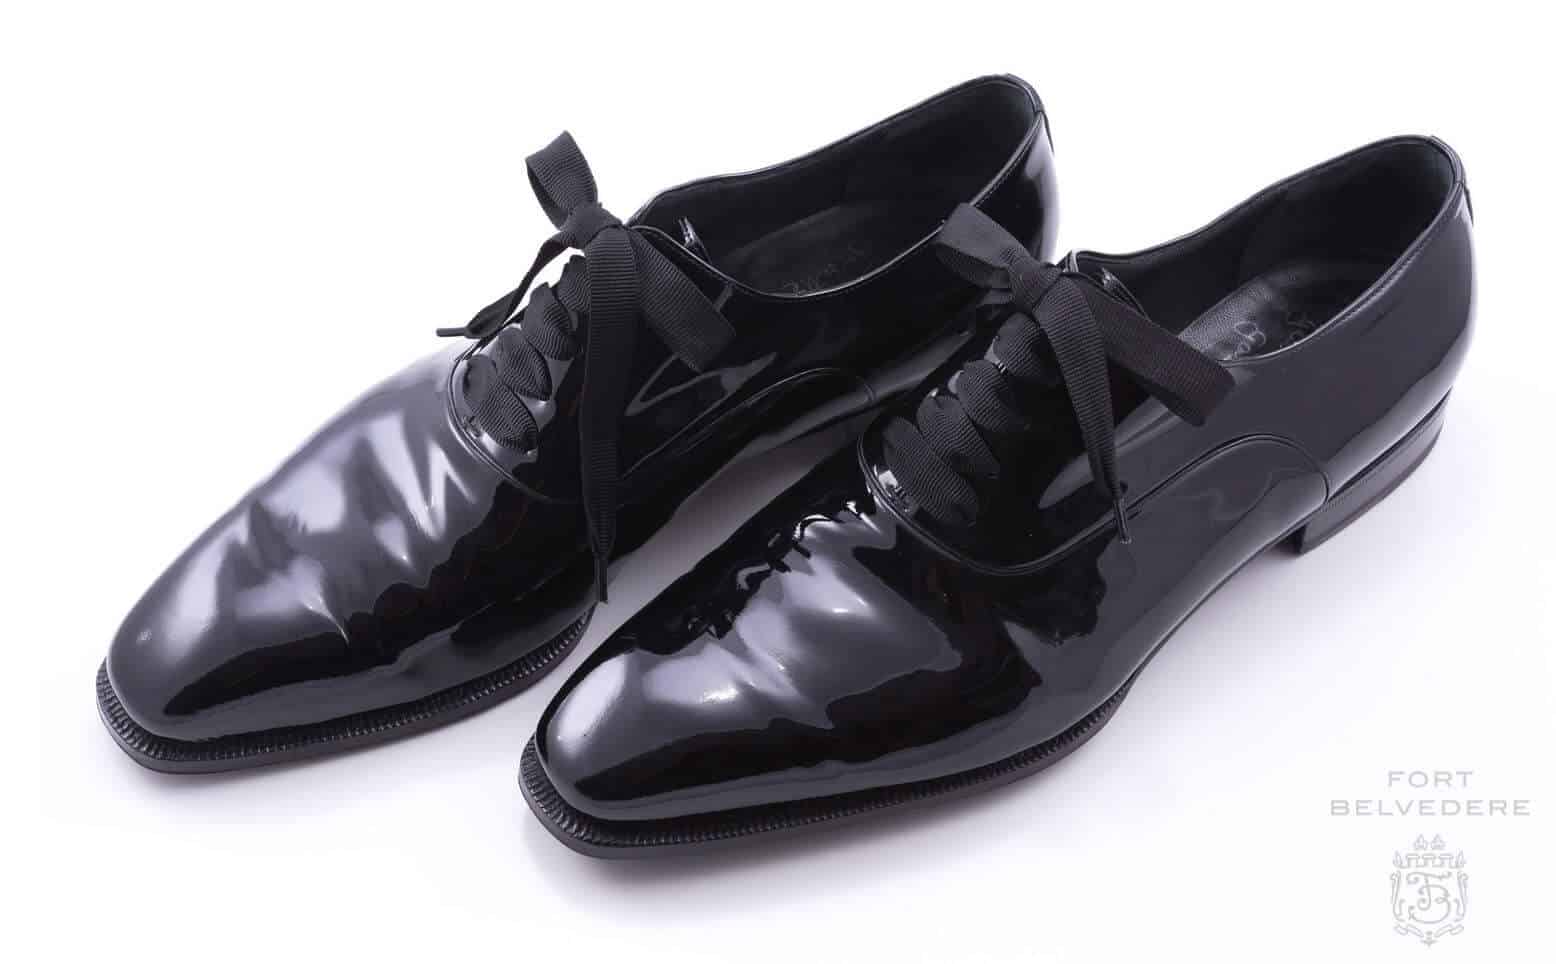 WEUIE Mens Patent Leather Tuxedo Business Dress Shoes Lace up Pointed Toe Classic Modern Formal Oxfords